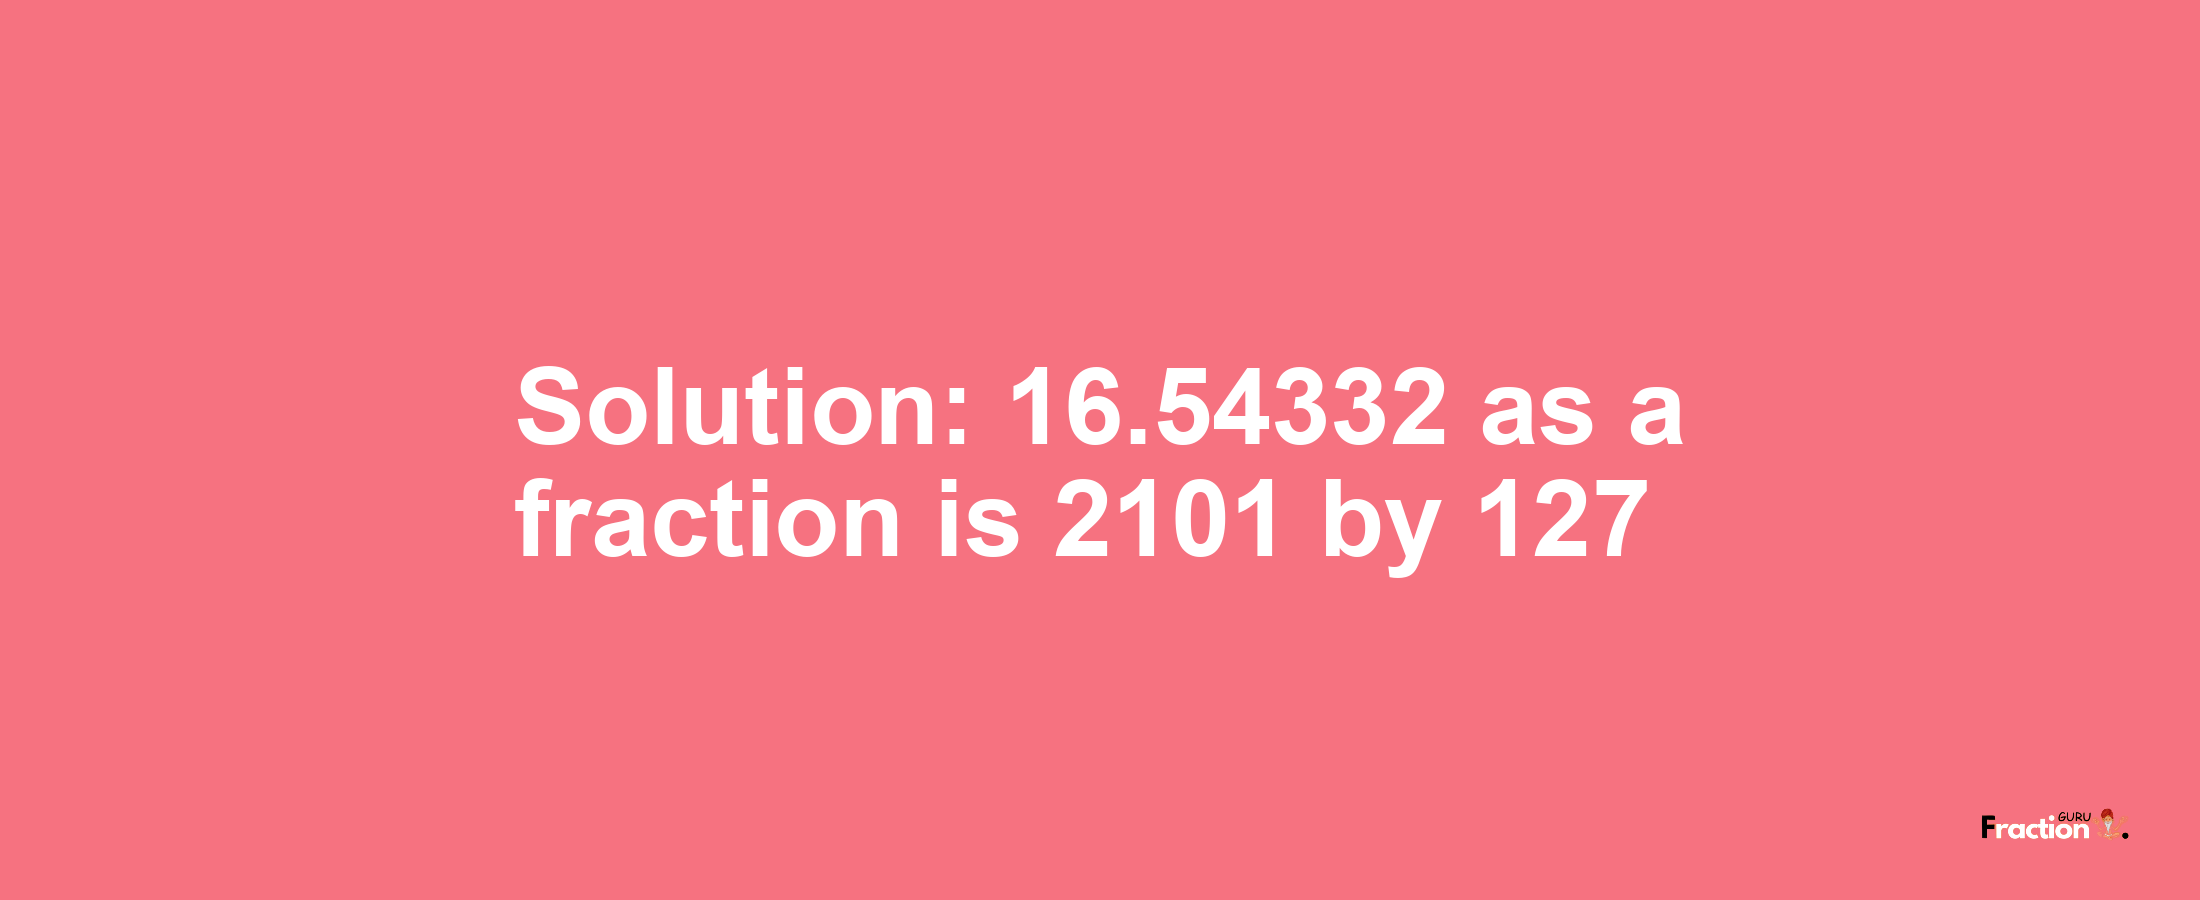 Solution:16.54332 as a fraction is 2101/127